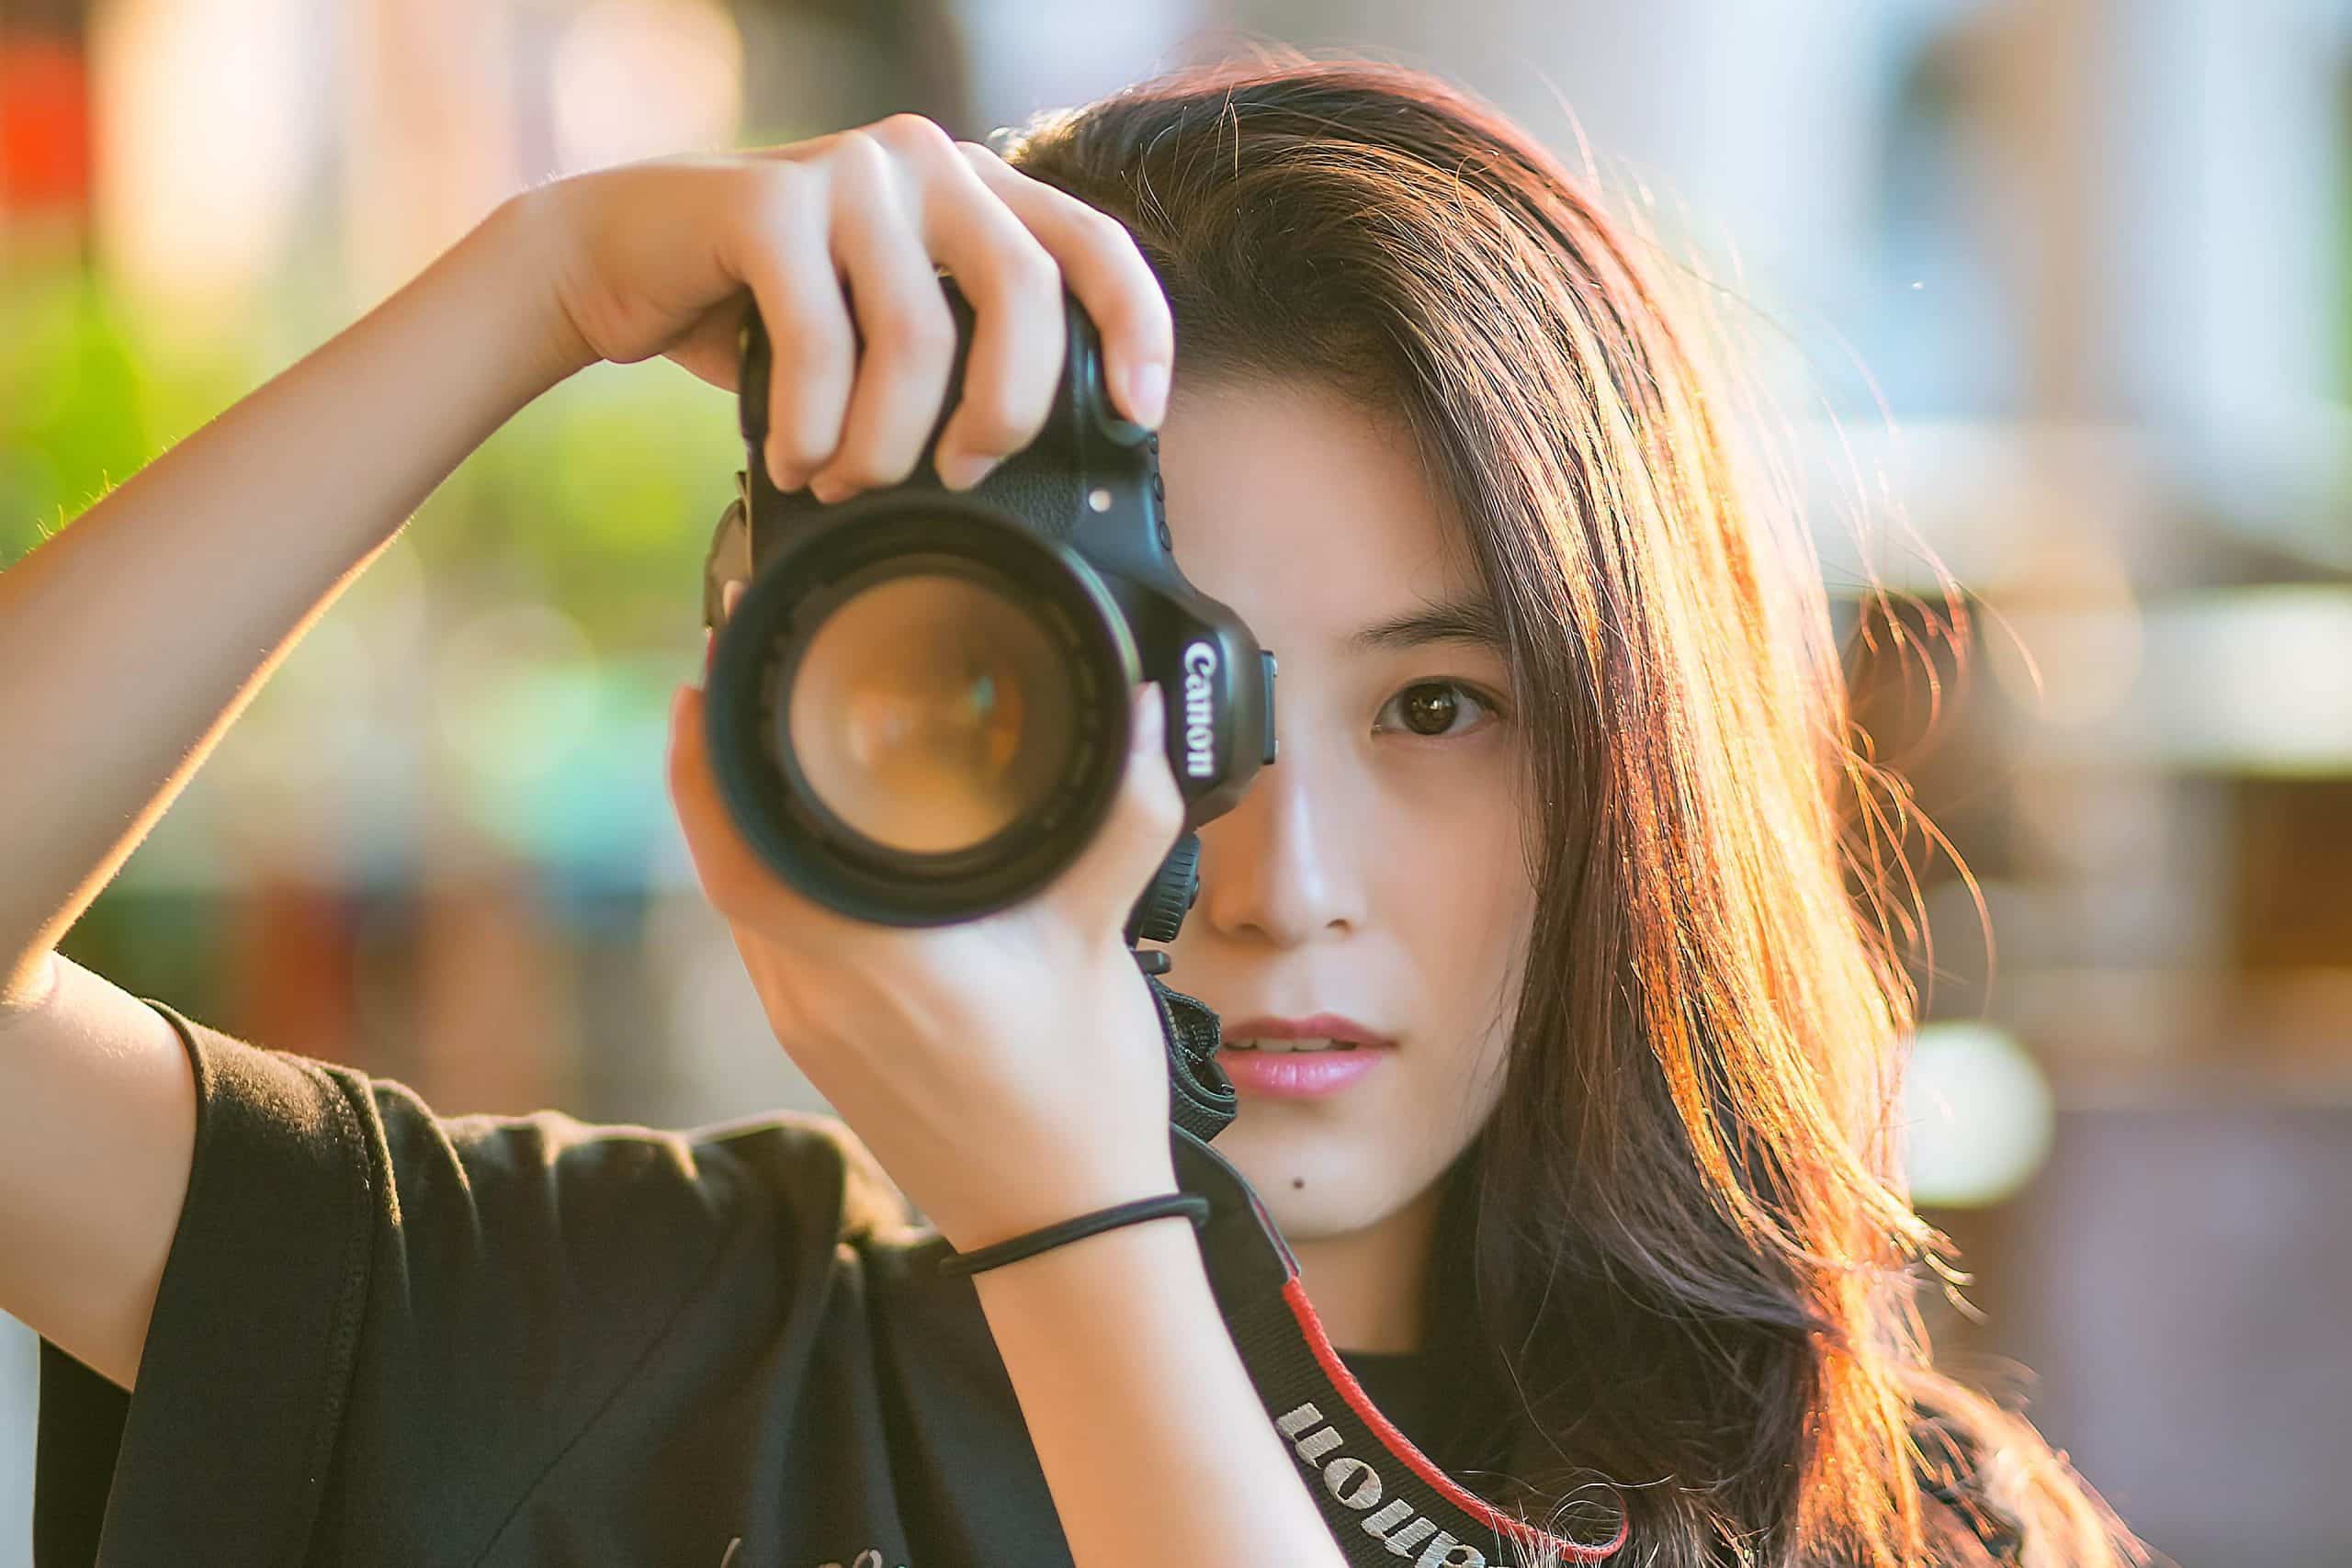 5 Creative Ways to Use Cinemagraphs